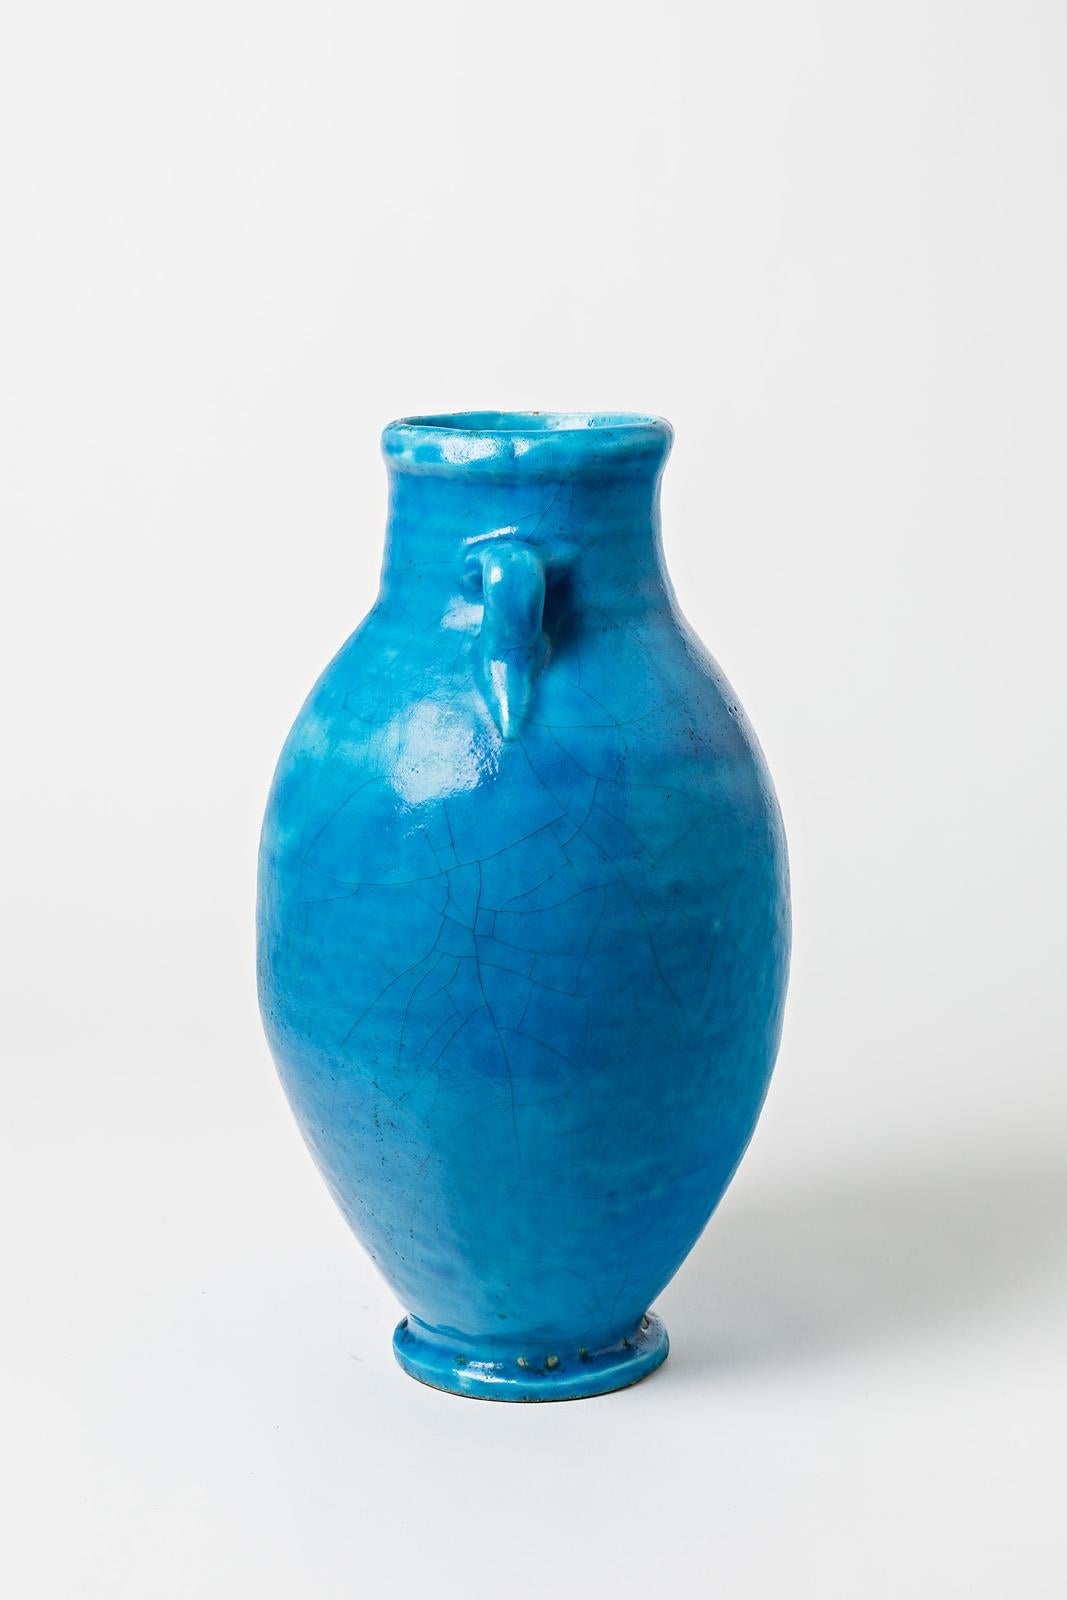 20th Century Blue glazed ceramic vase attributed to Raoul Lachenal, circa 1930. For Sale